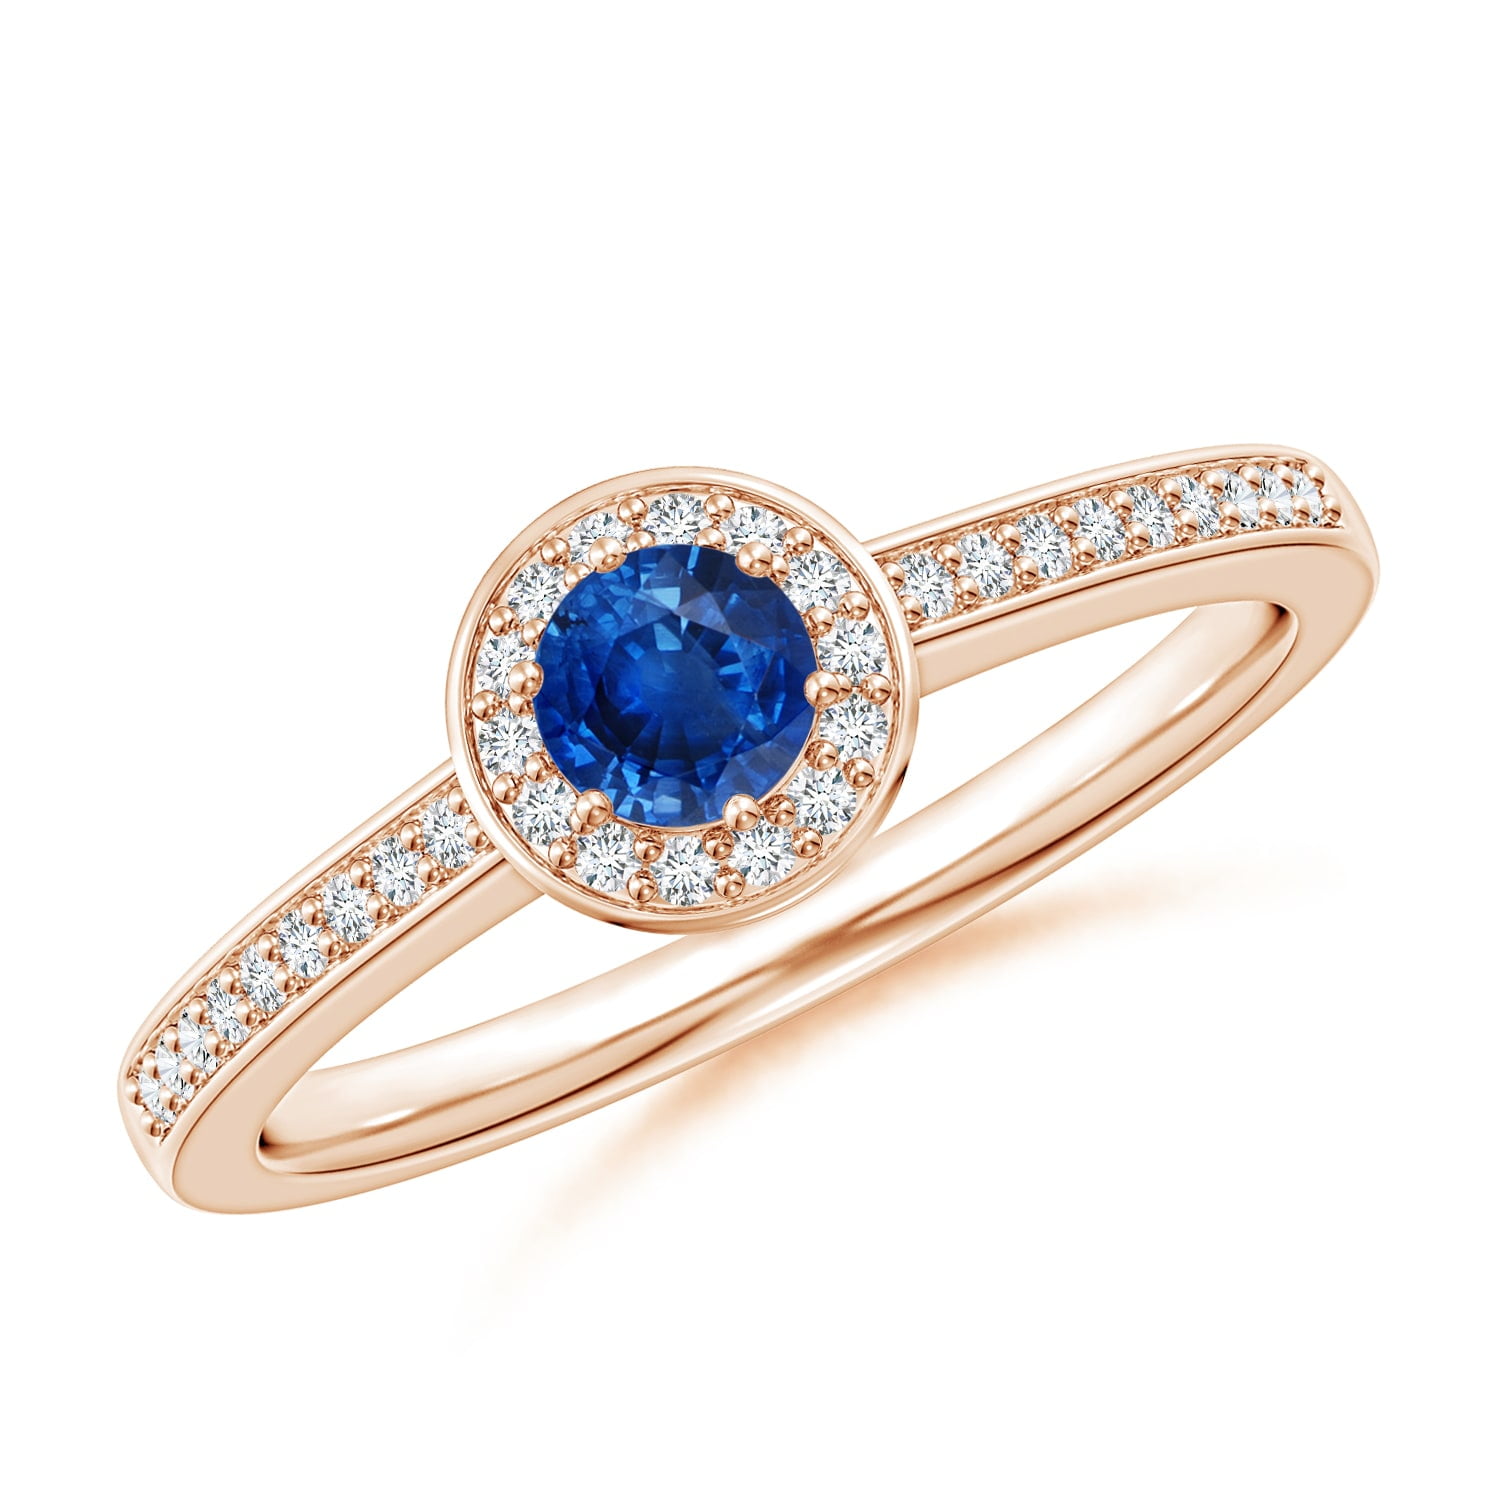 Sizes 4-13 JewelrySuperMart Collection 14k Yellow or White Gold 5 x 3 mm Oval Sapphire Ring